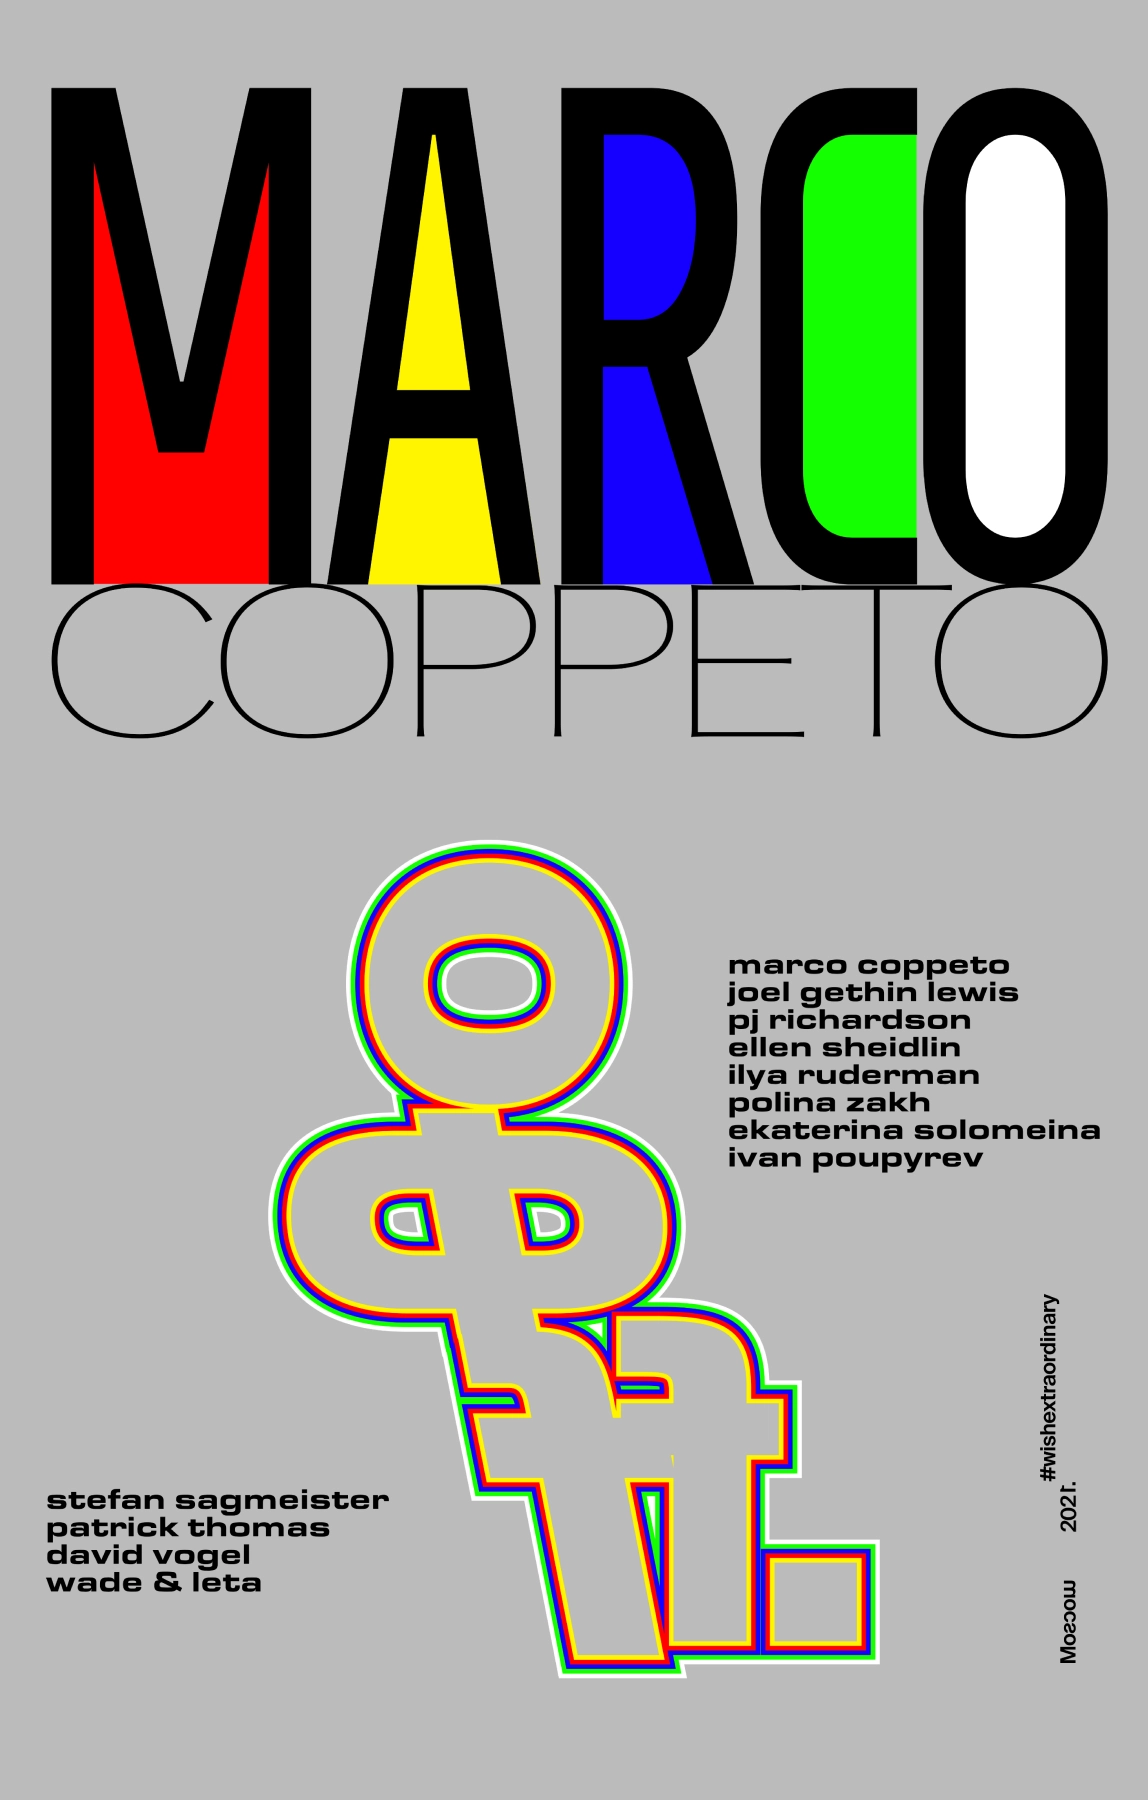 Poster for the graphic design festival